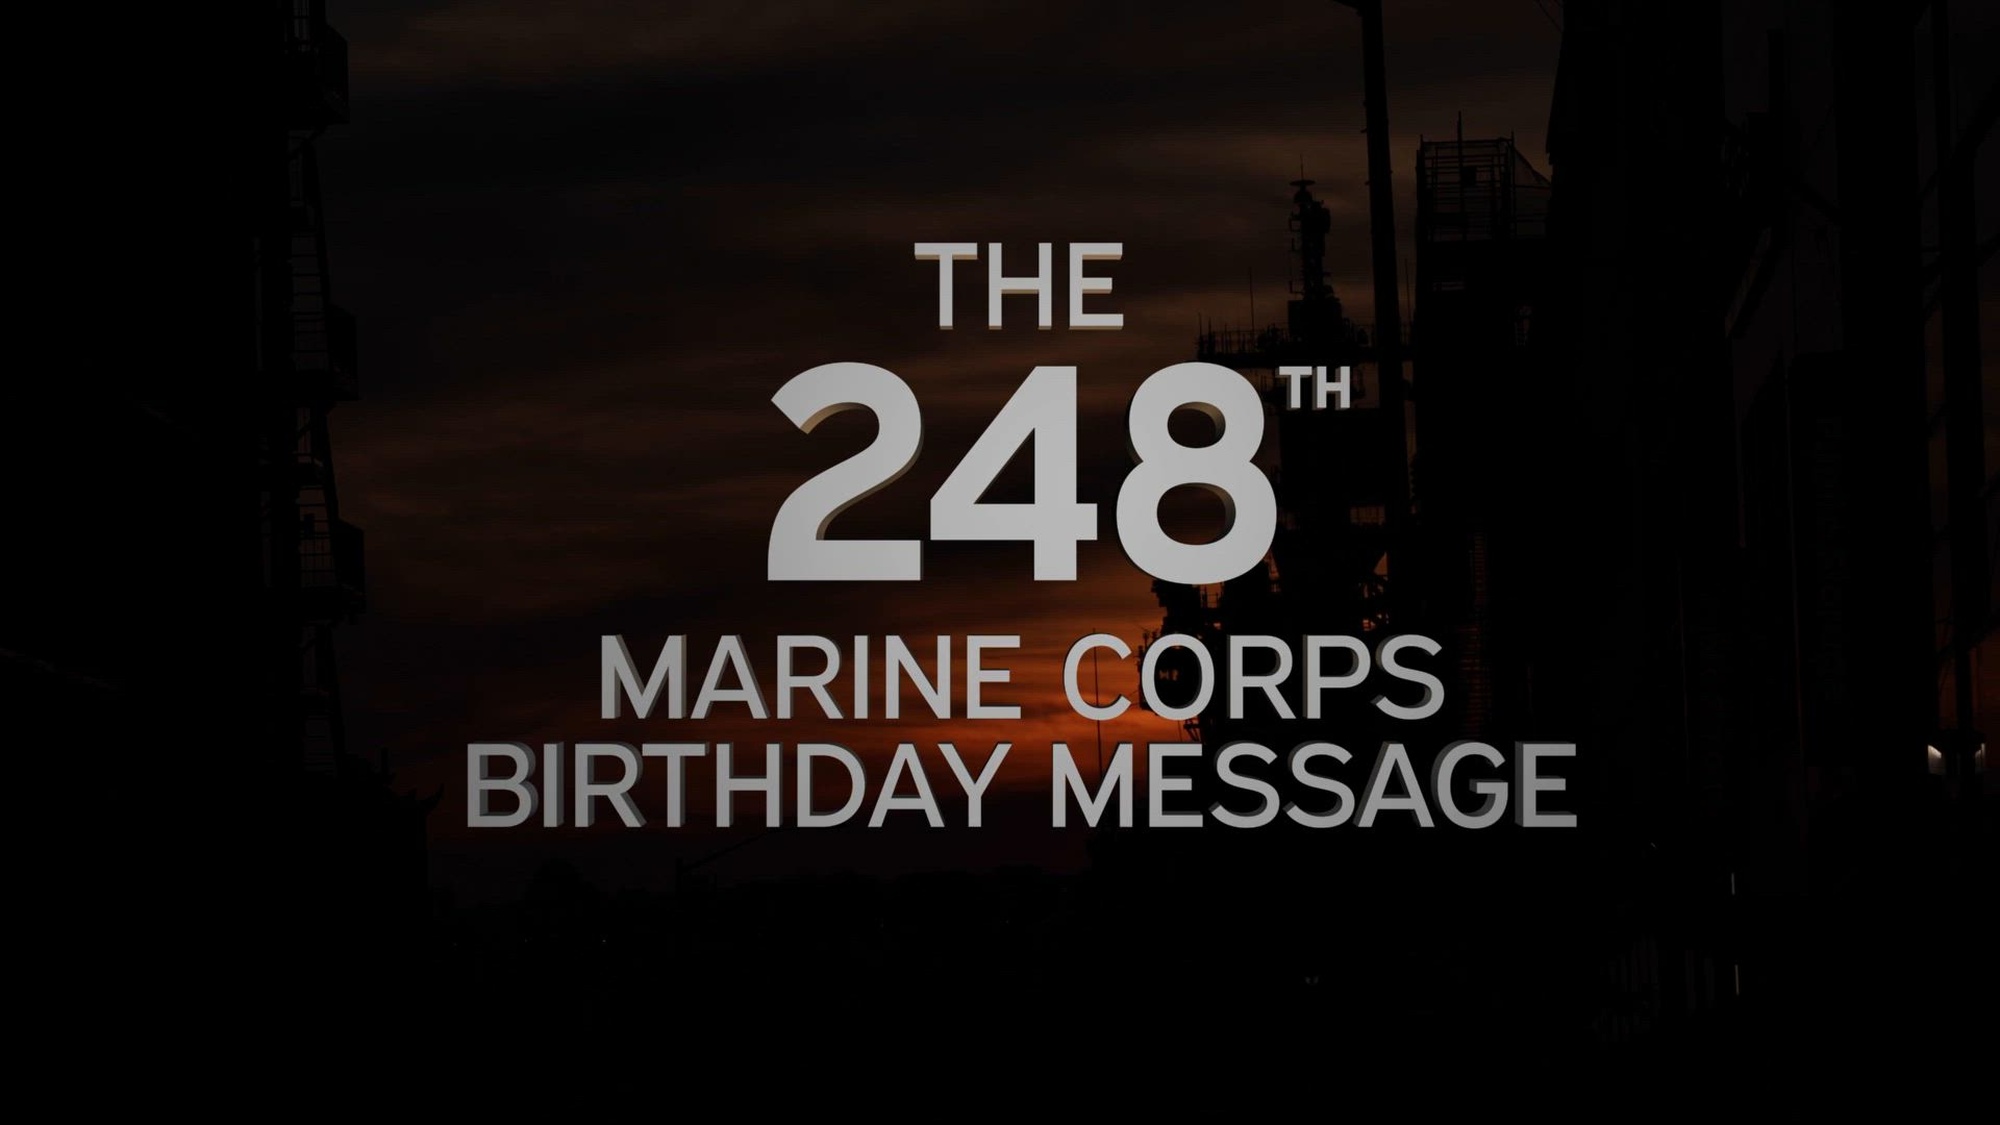 On November 10, 2023, U.S. Marines around the globe will celebrate 248 years of success on the battlefield, and reaffirm their commitment to our Corps' proud legacy of honor, courage and commitment.